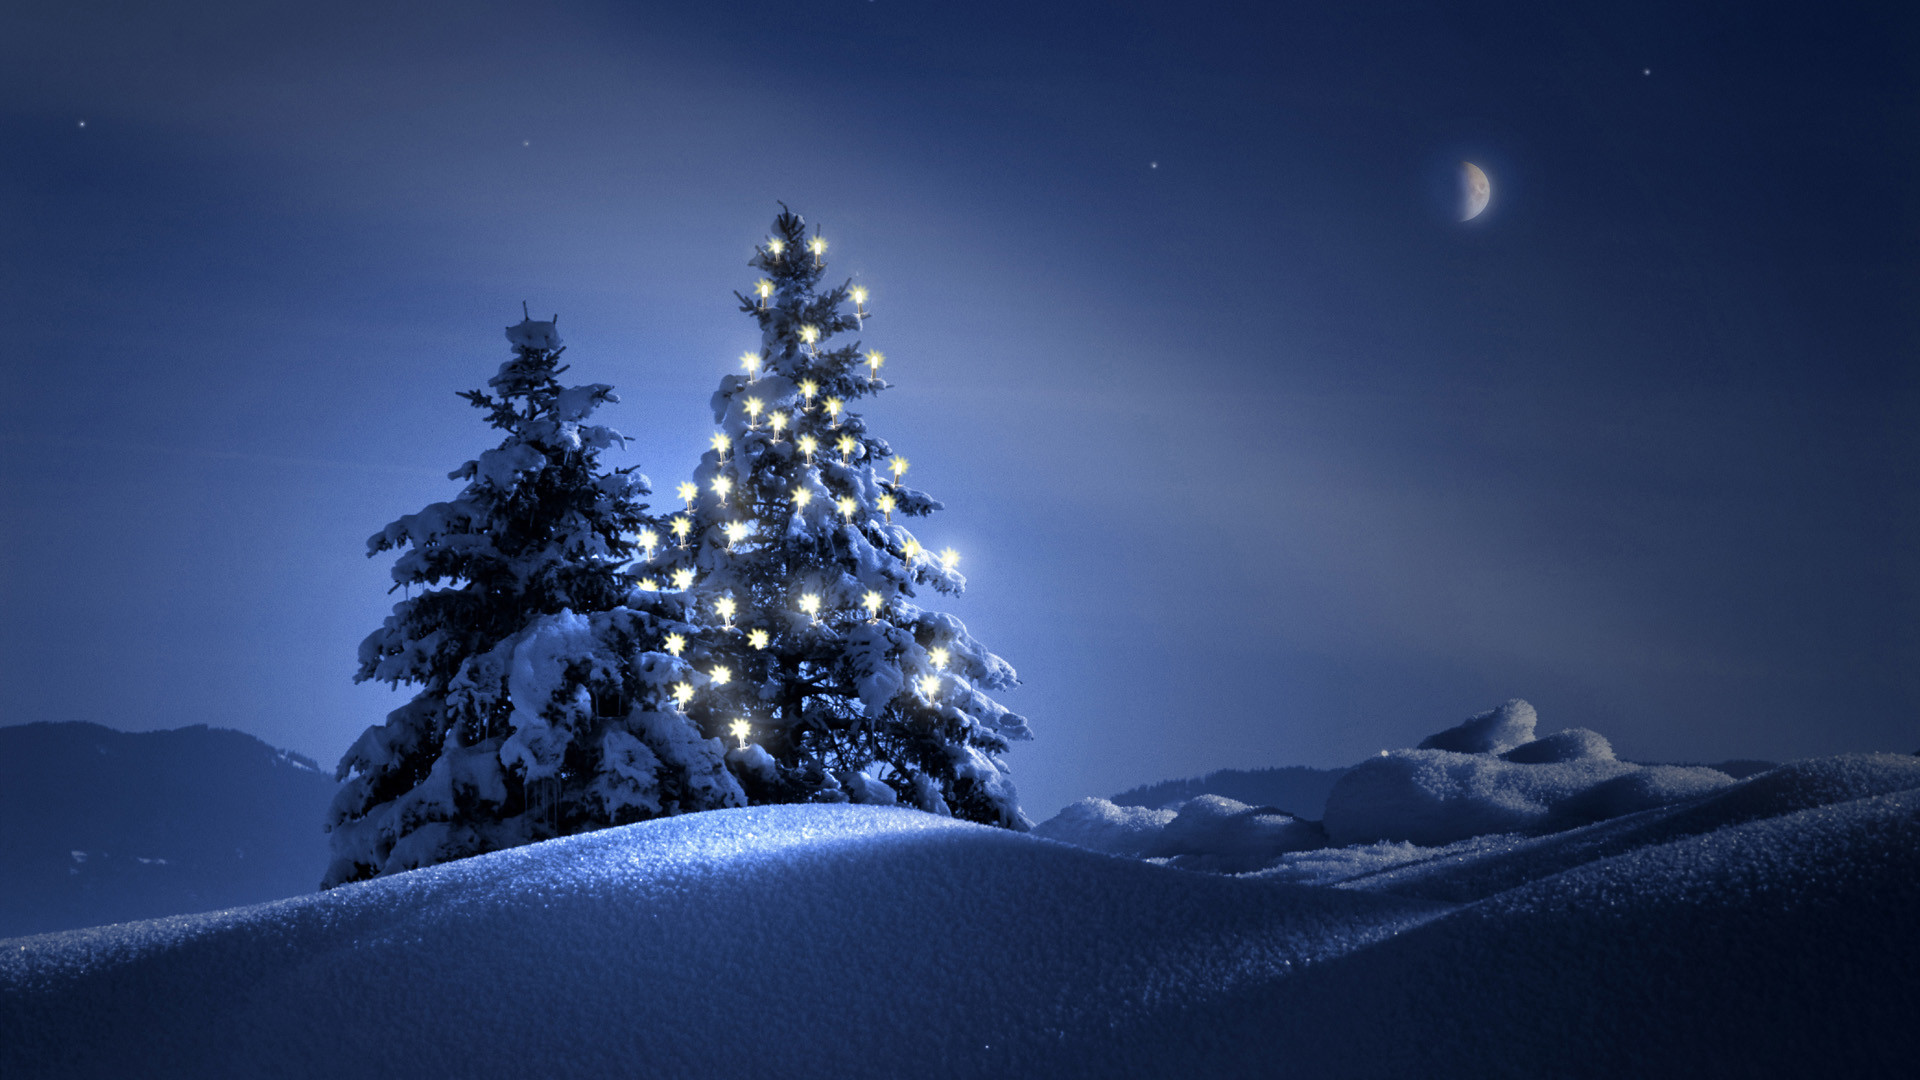 "Collection of hundreds of Christmas Tree Wallpaper from all over the world.